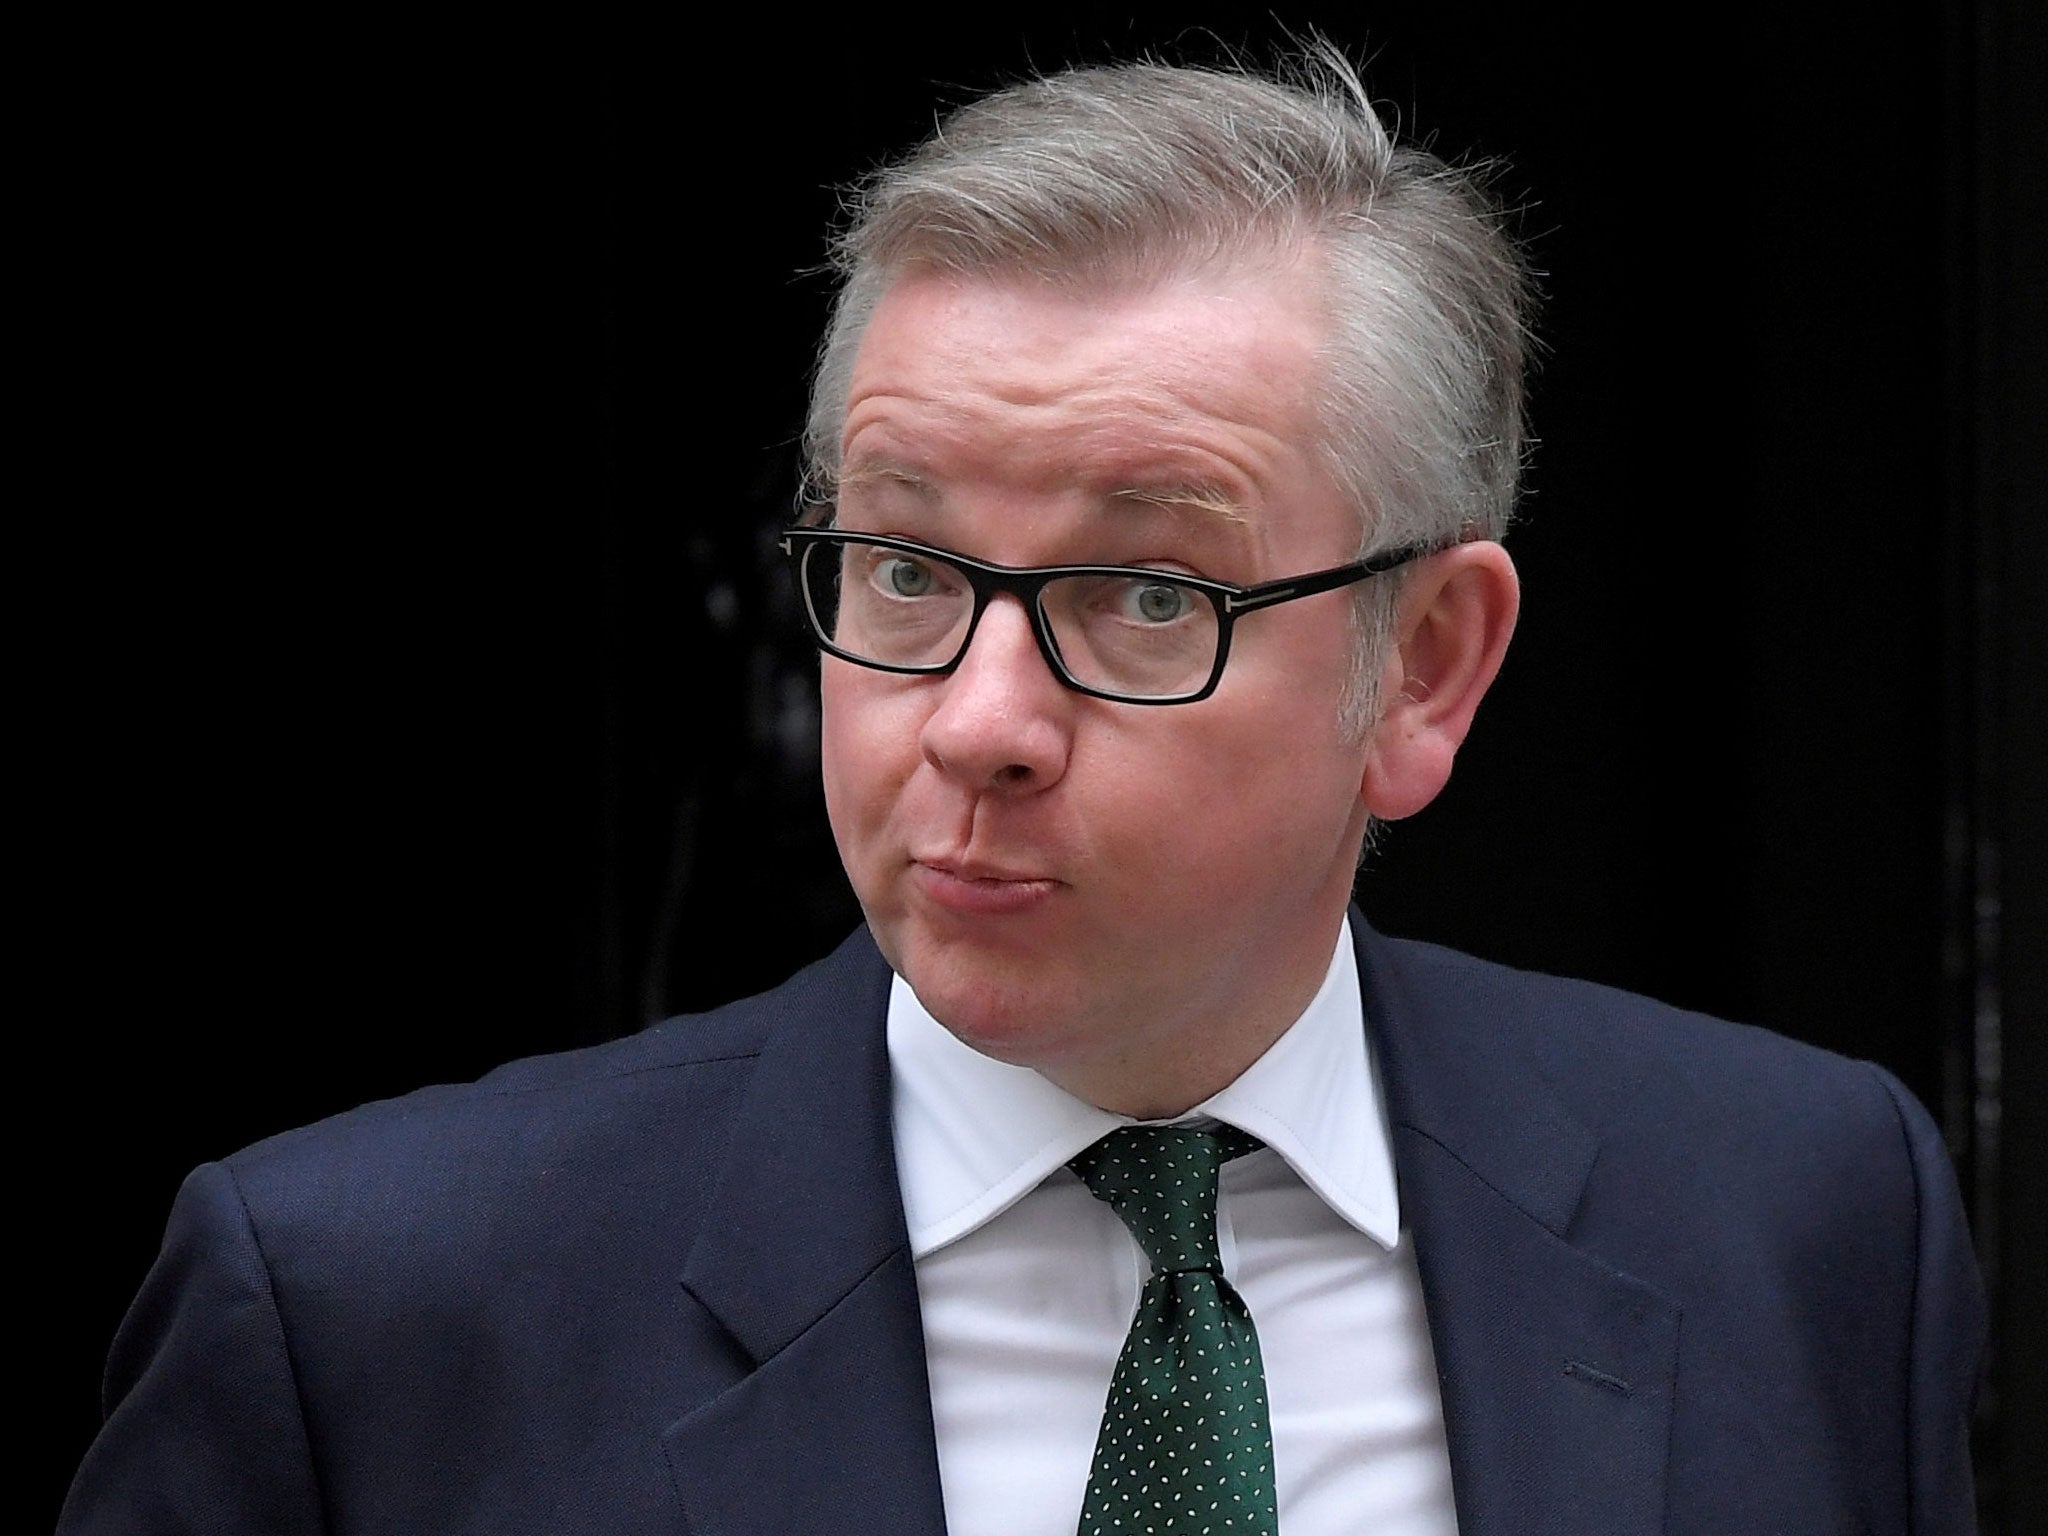 Michael Gove has promised a ‘green Brexit’, but pledges on animal welfare are now in doubt